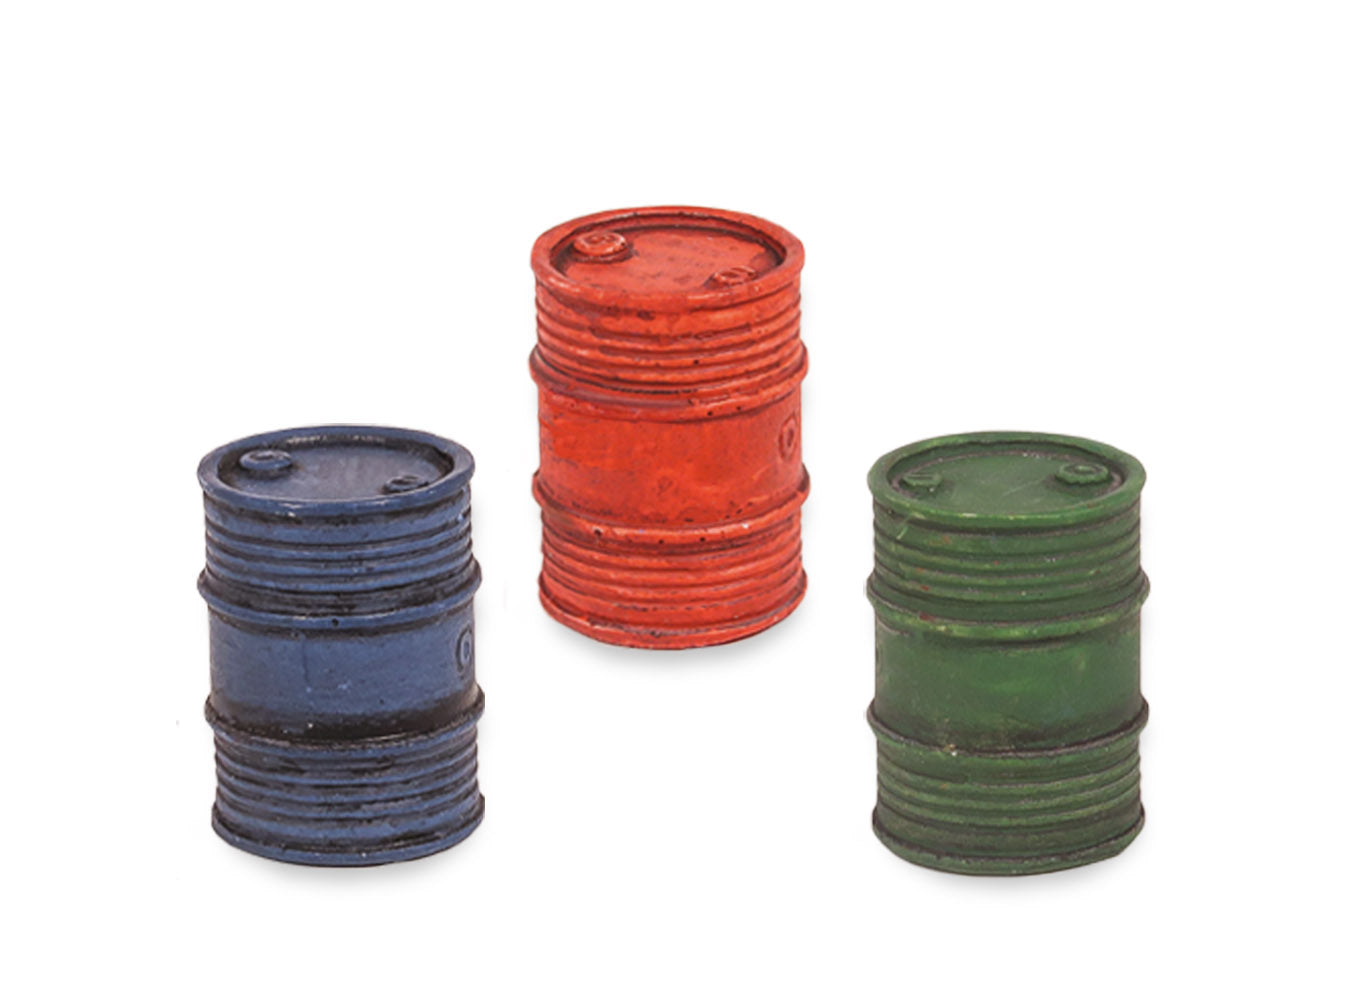 Lineside Oil Drums (x3)